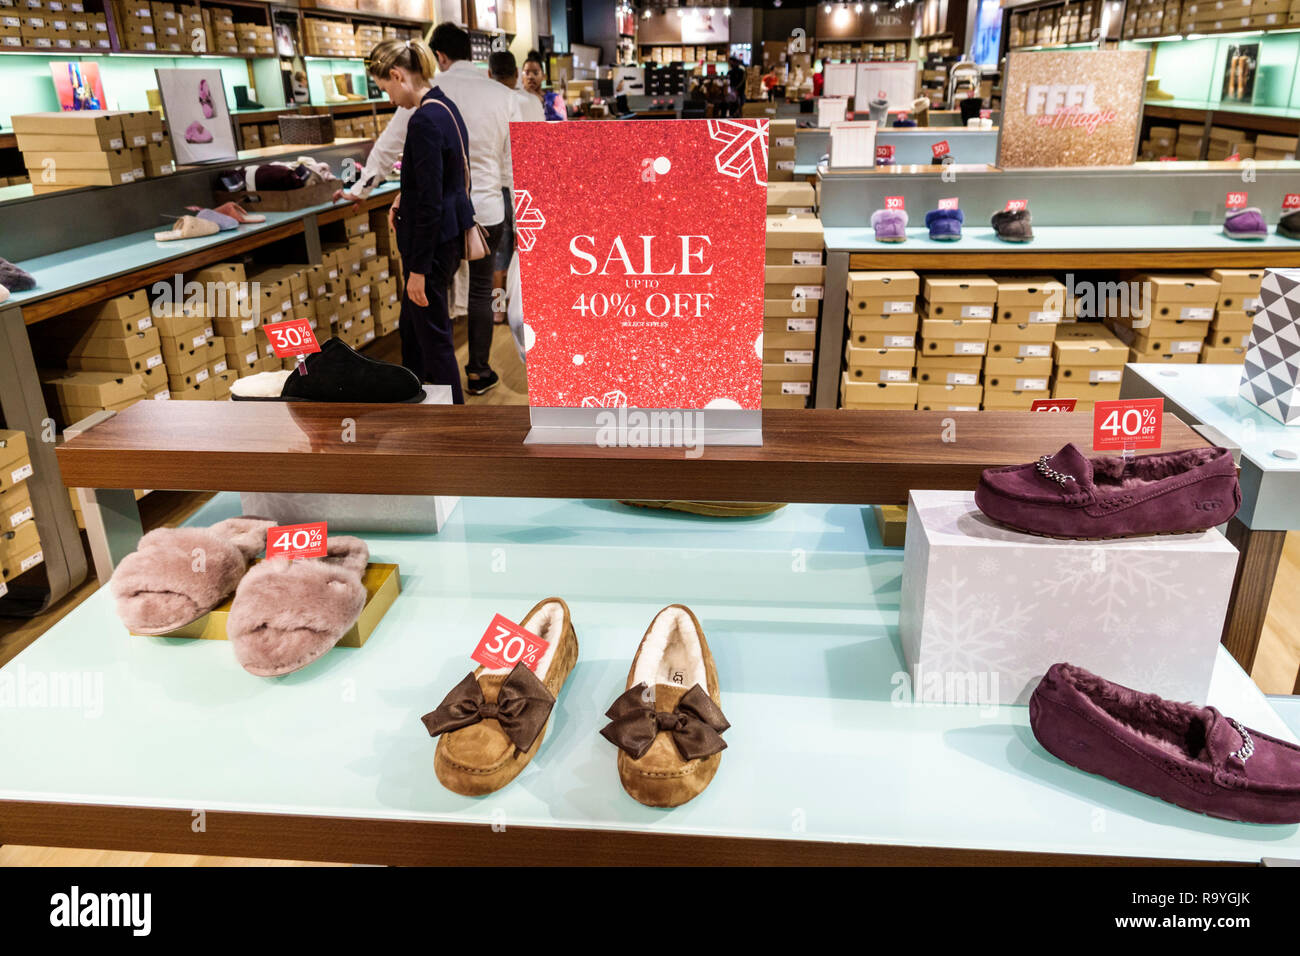 Fort Ft. Lauderdale Florida,Sunrise,Sawgrass Mills mall,UGG Australia  Company Store,product products display sale,promotion 40% discount,visitors  trav Stock Photo - Alamy